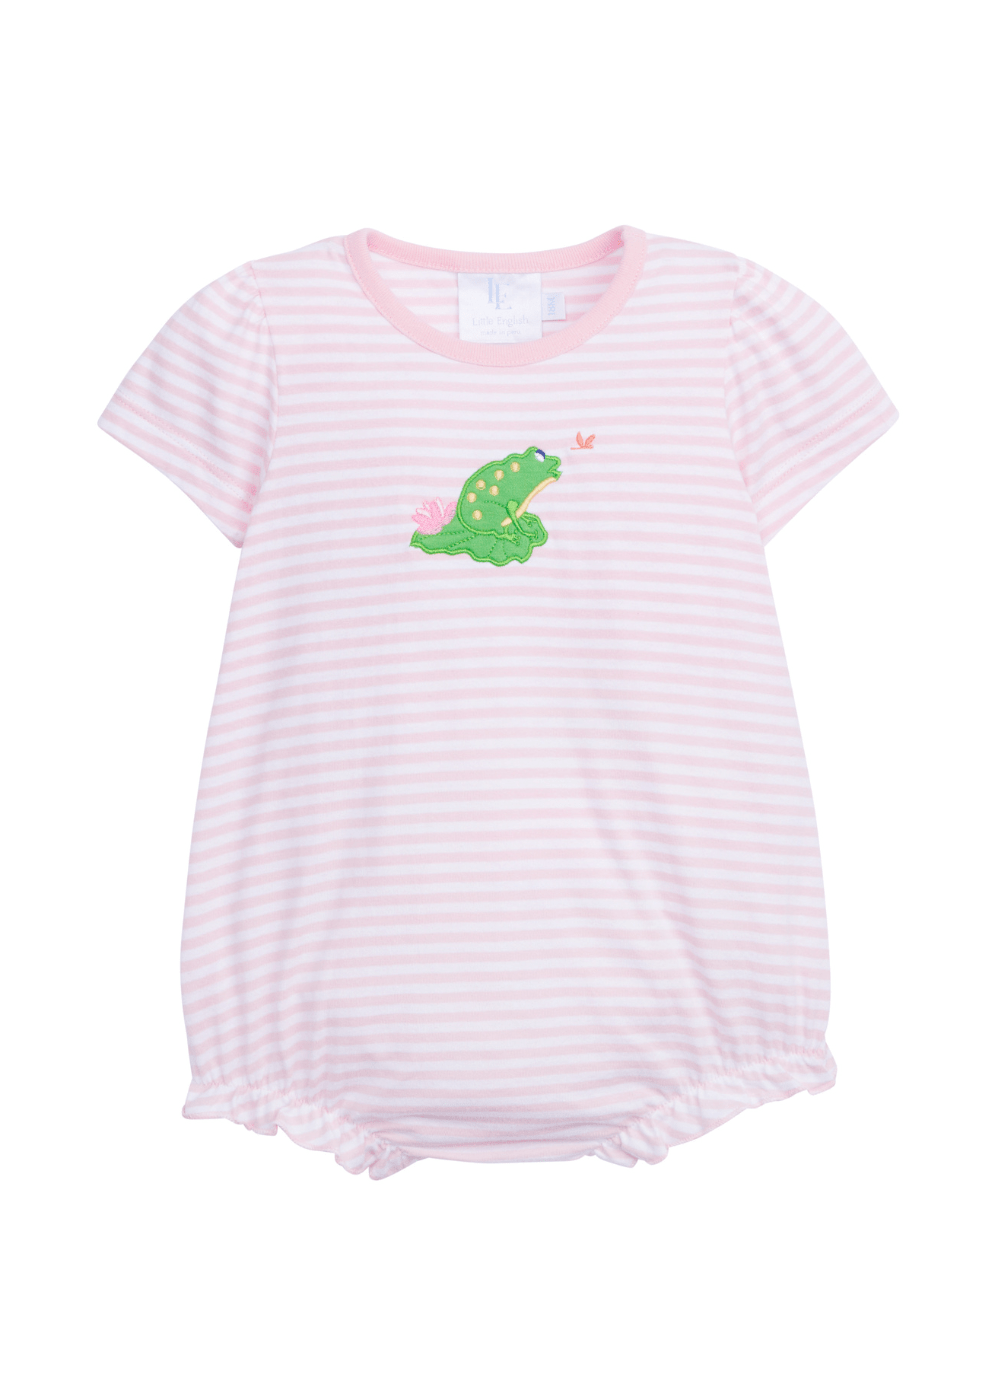 seguridadindustrialcr baby girls pink and white striped kinit bubble with frog applique